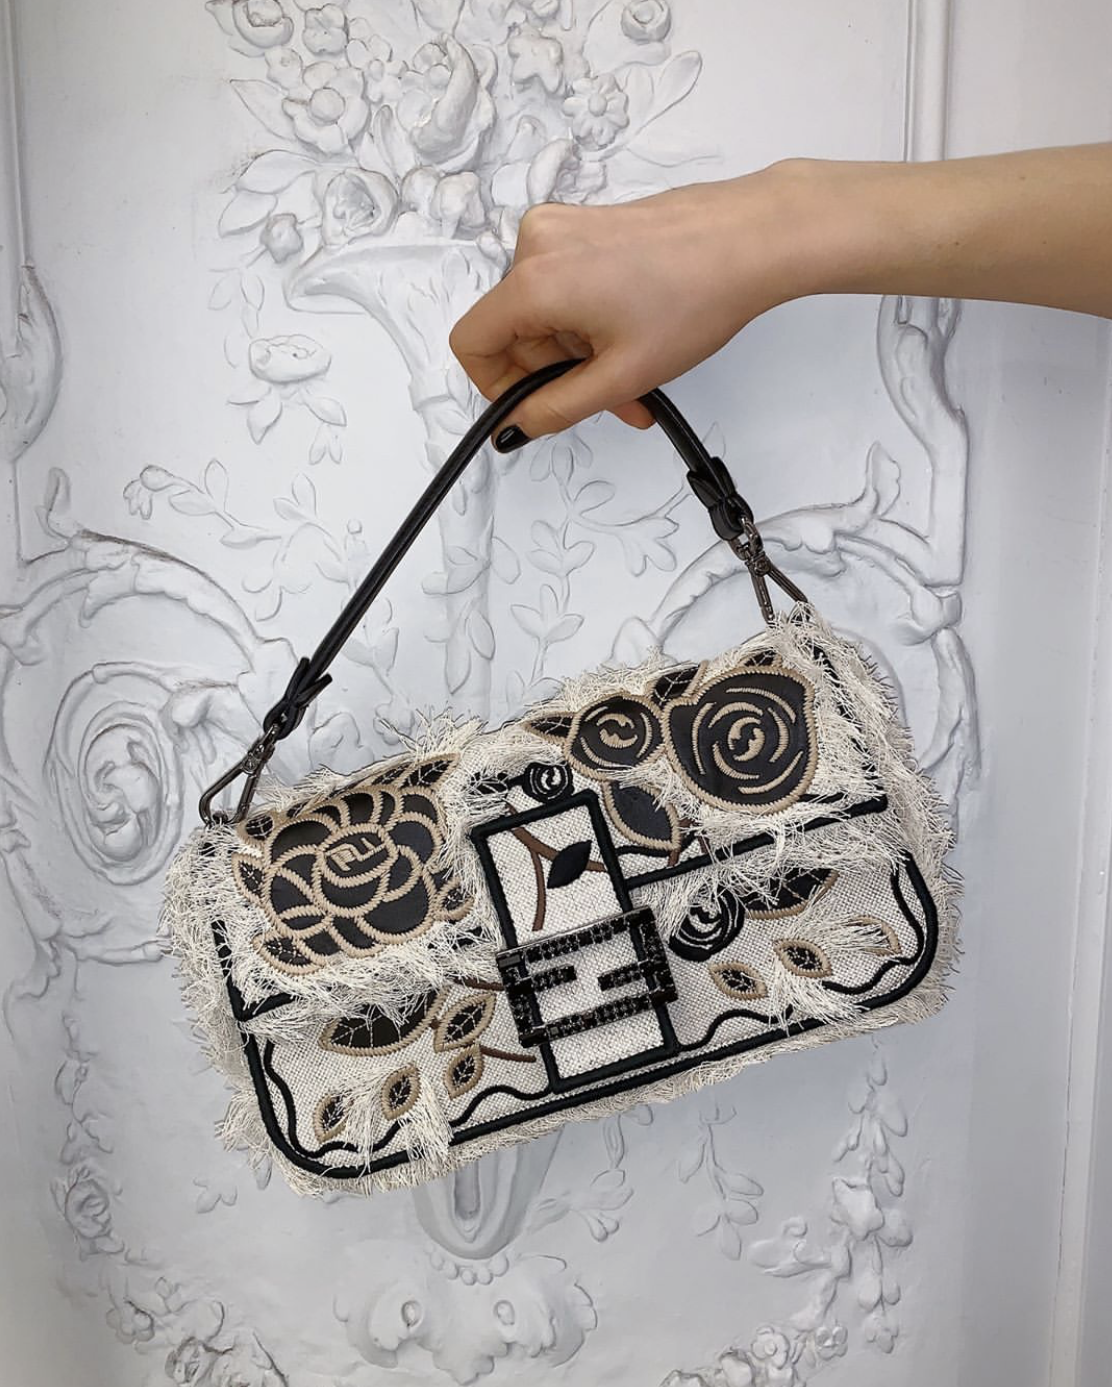 Bomb_Product_of_the_day_Fendi_Baguette_bag_3